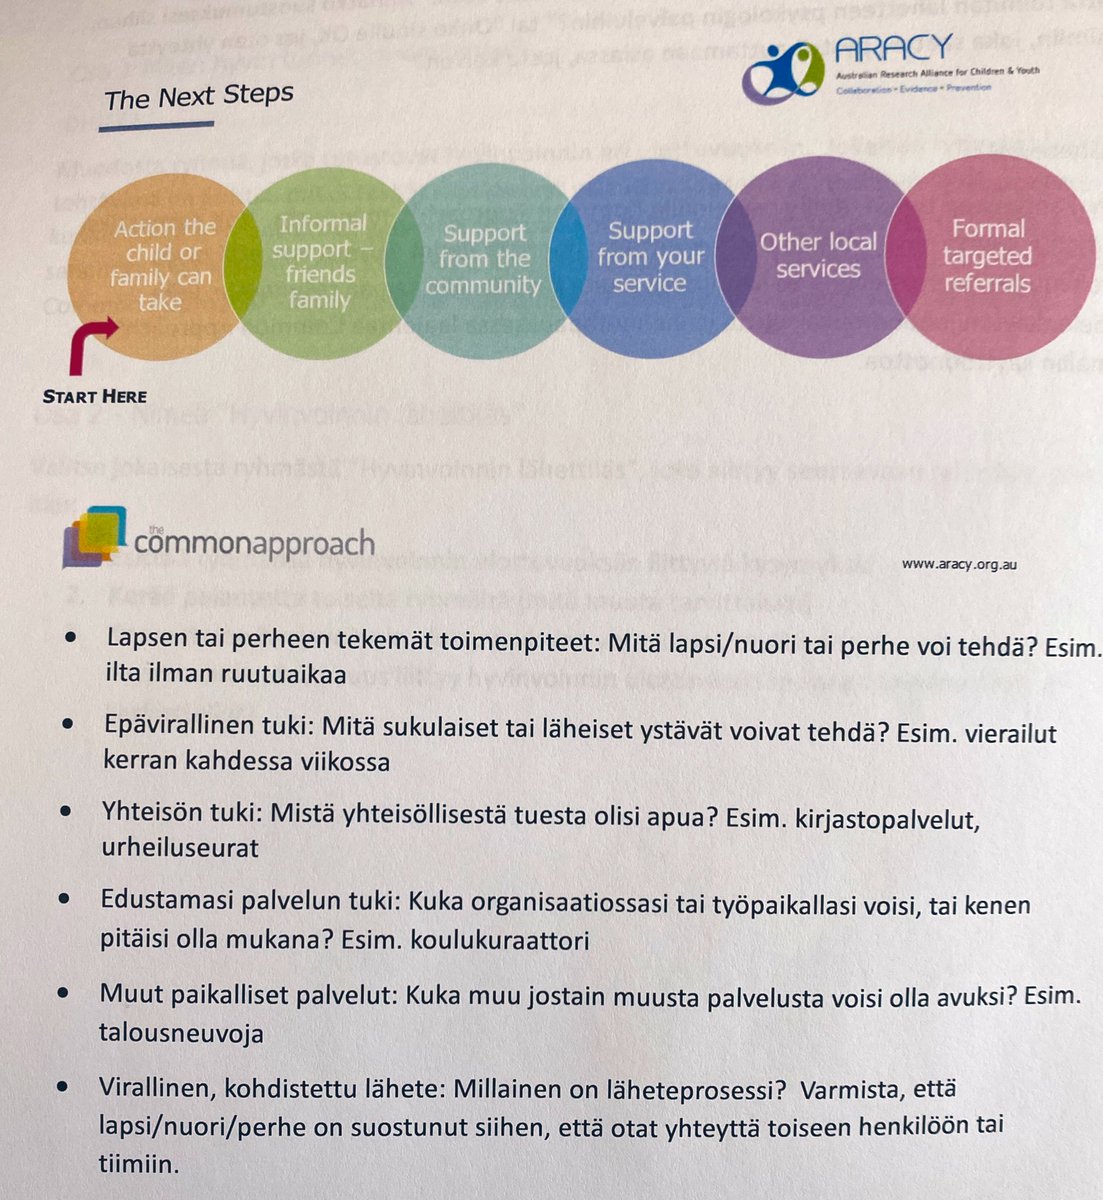 So excited to be kicking off Common Approach training for the City of Helsinki. Holistic, strengths based approaches to child wellbeing know no international borders @ARACYAustralia @OKiikojalka @LinnerJohanna @rebecca_goodhue https://t.co/dZDutVRUan